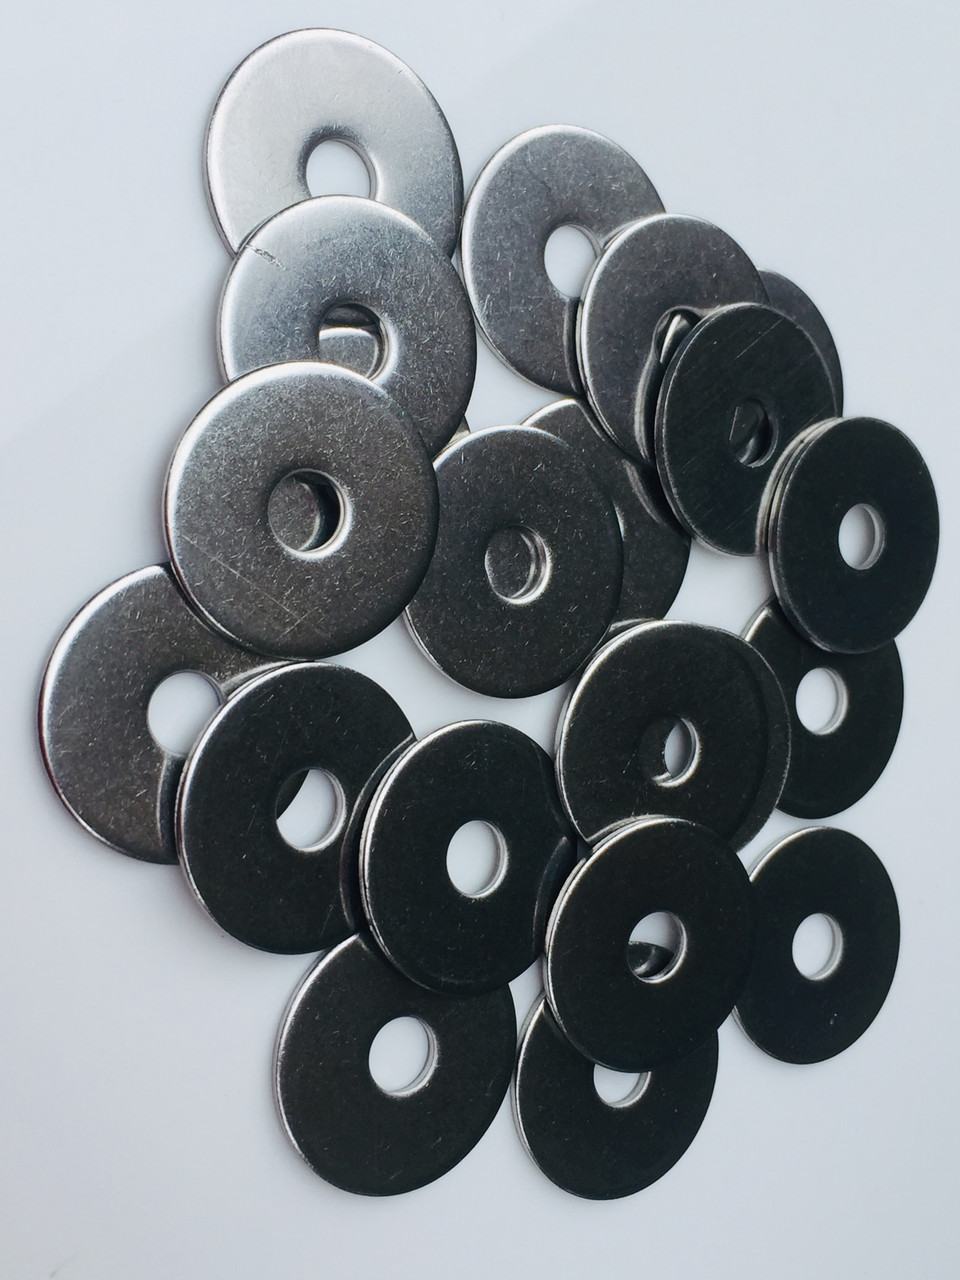 M10 Washer 10.5mm (20 Pack) A2 Stainless Steel Form A Thick Flat Washers  Free UK Delivery